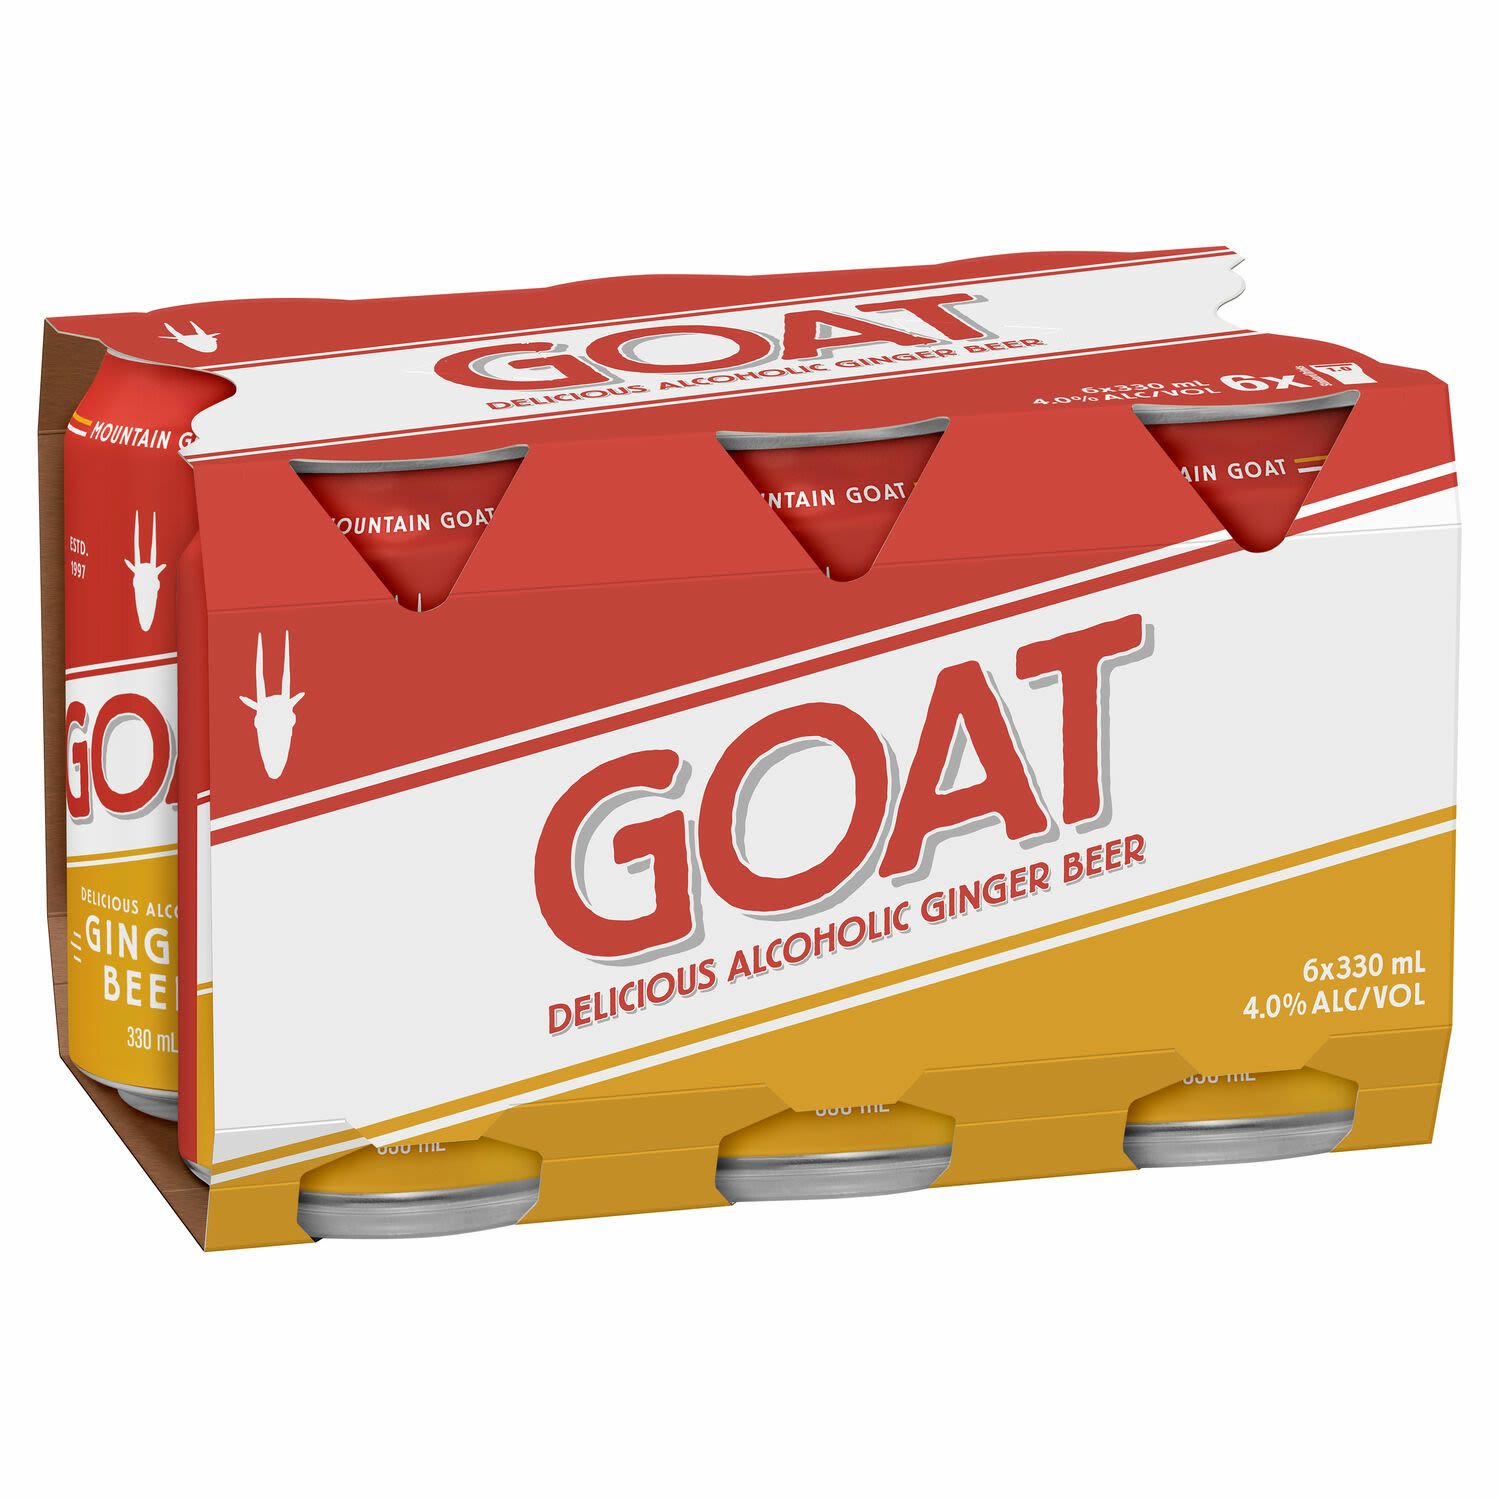 Mountain Goat GOAT Delicious Ginger Beer 4.0% 6x330mL